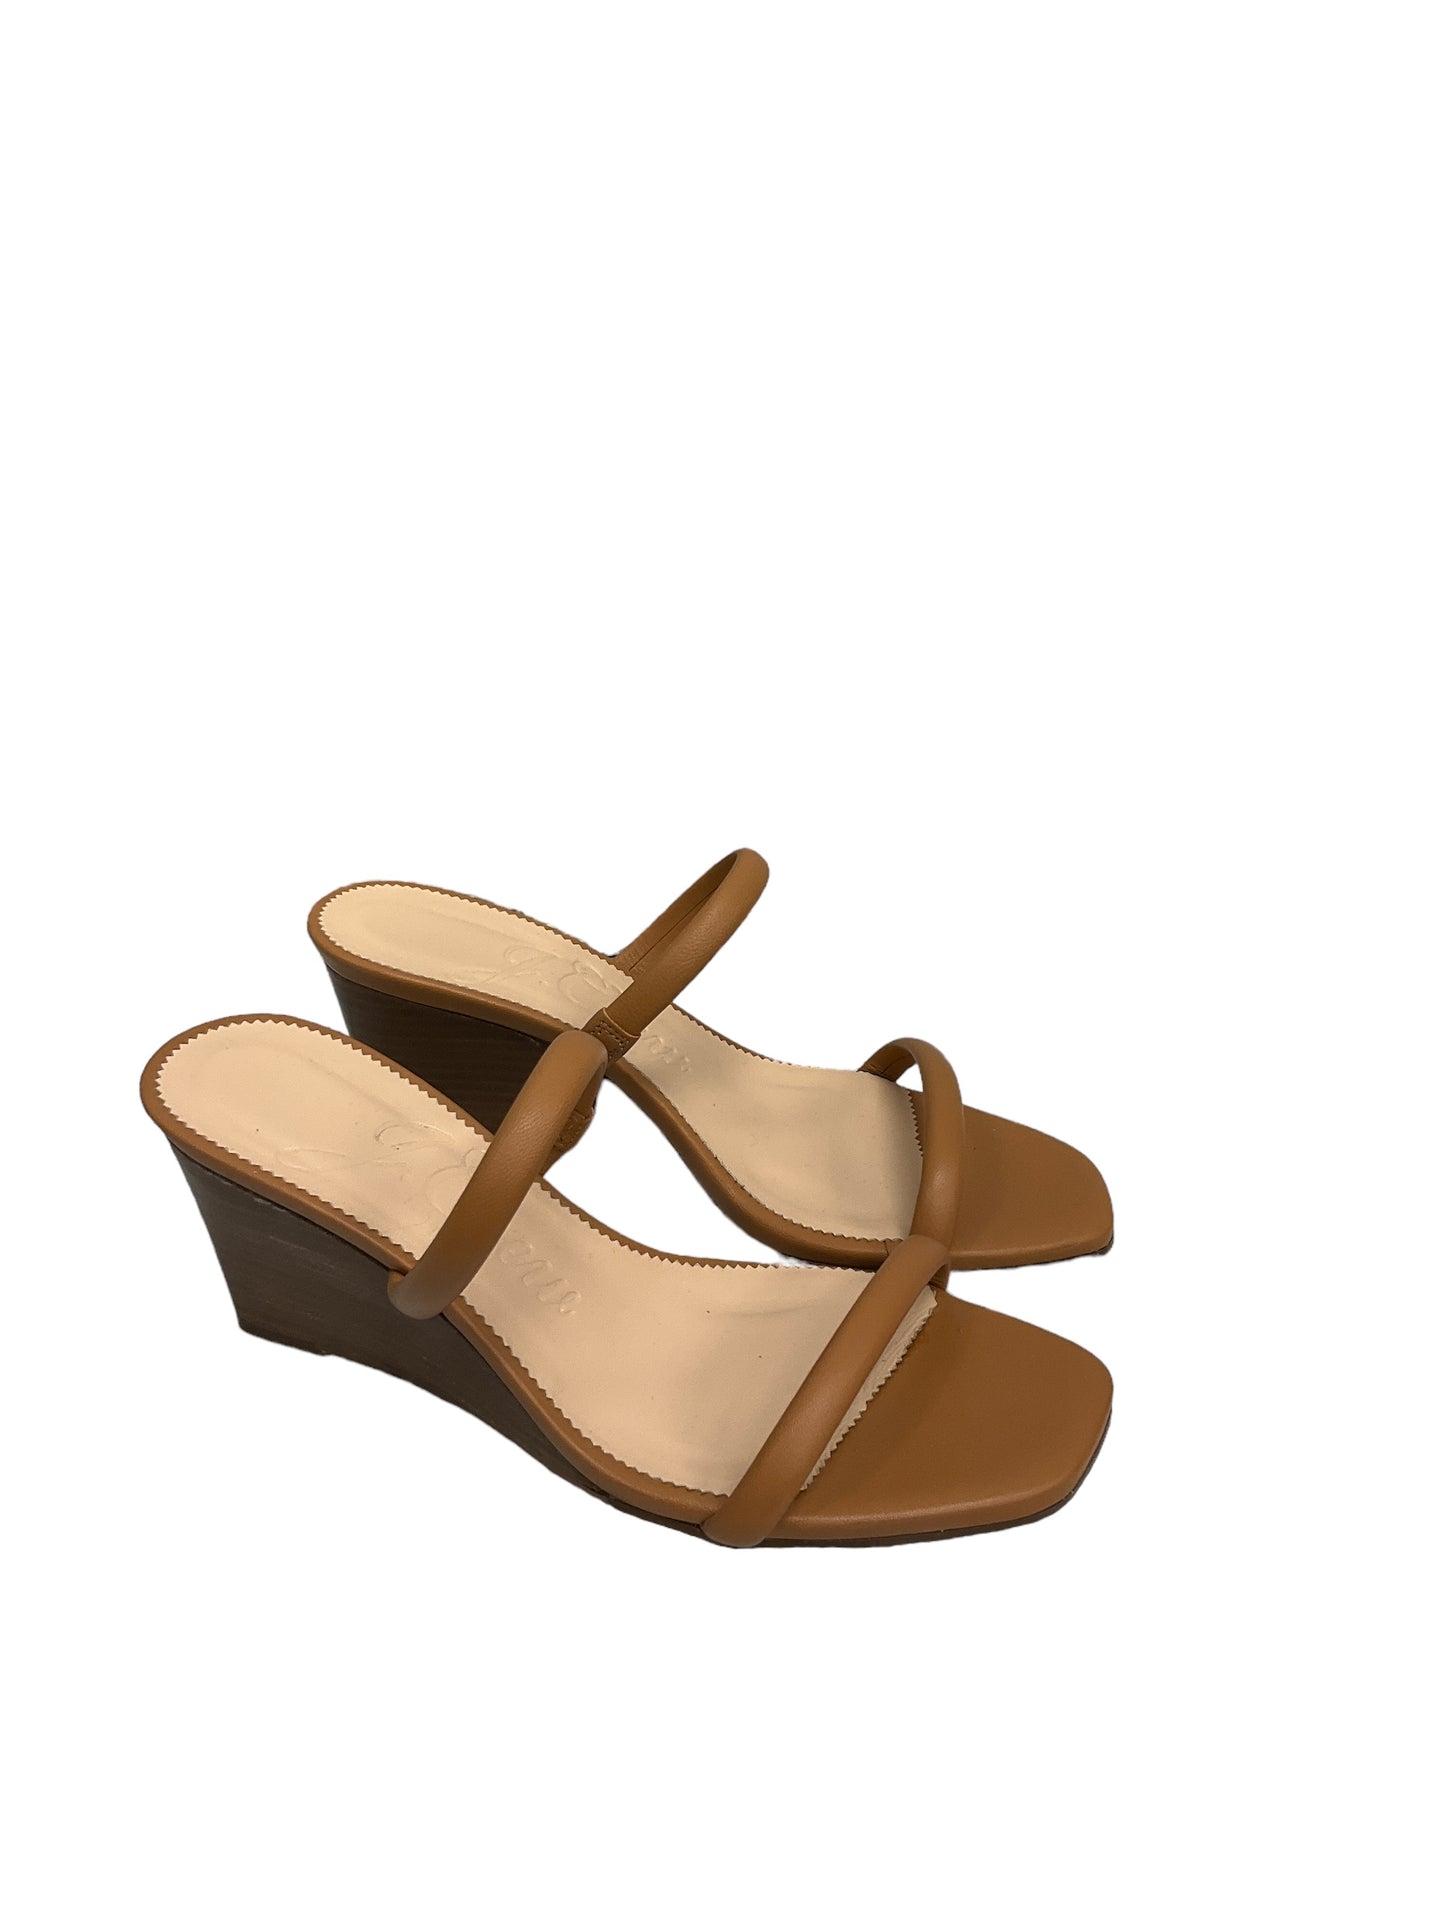 Sandals Heels Wedge By J. Crew  Size: 7